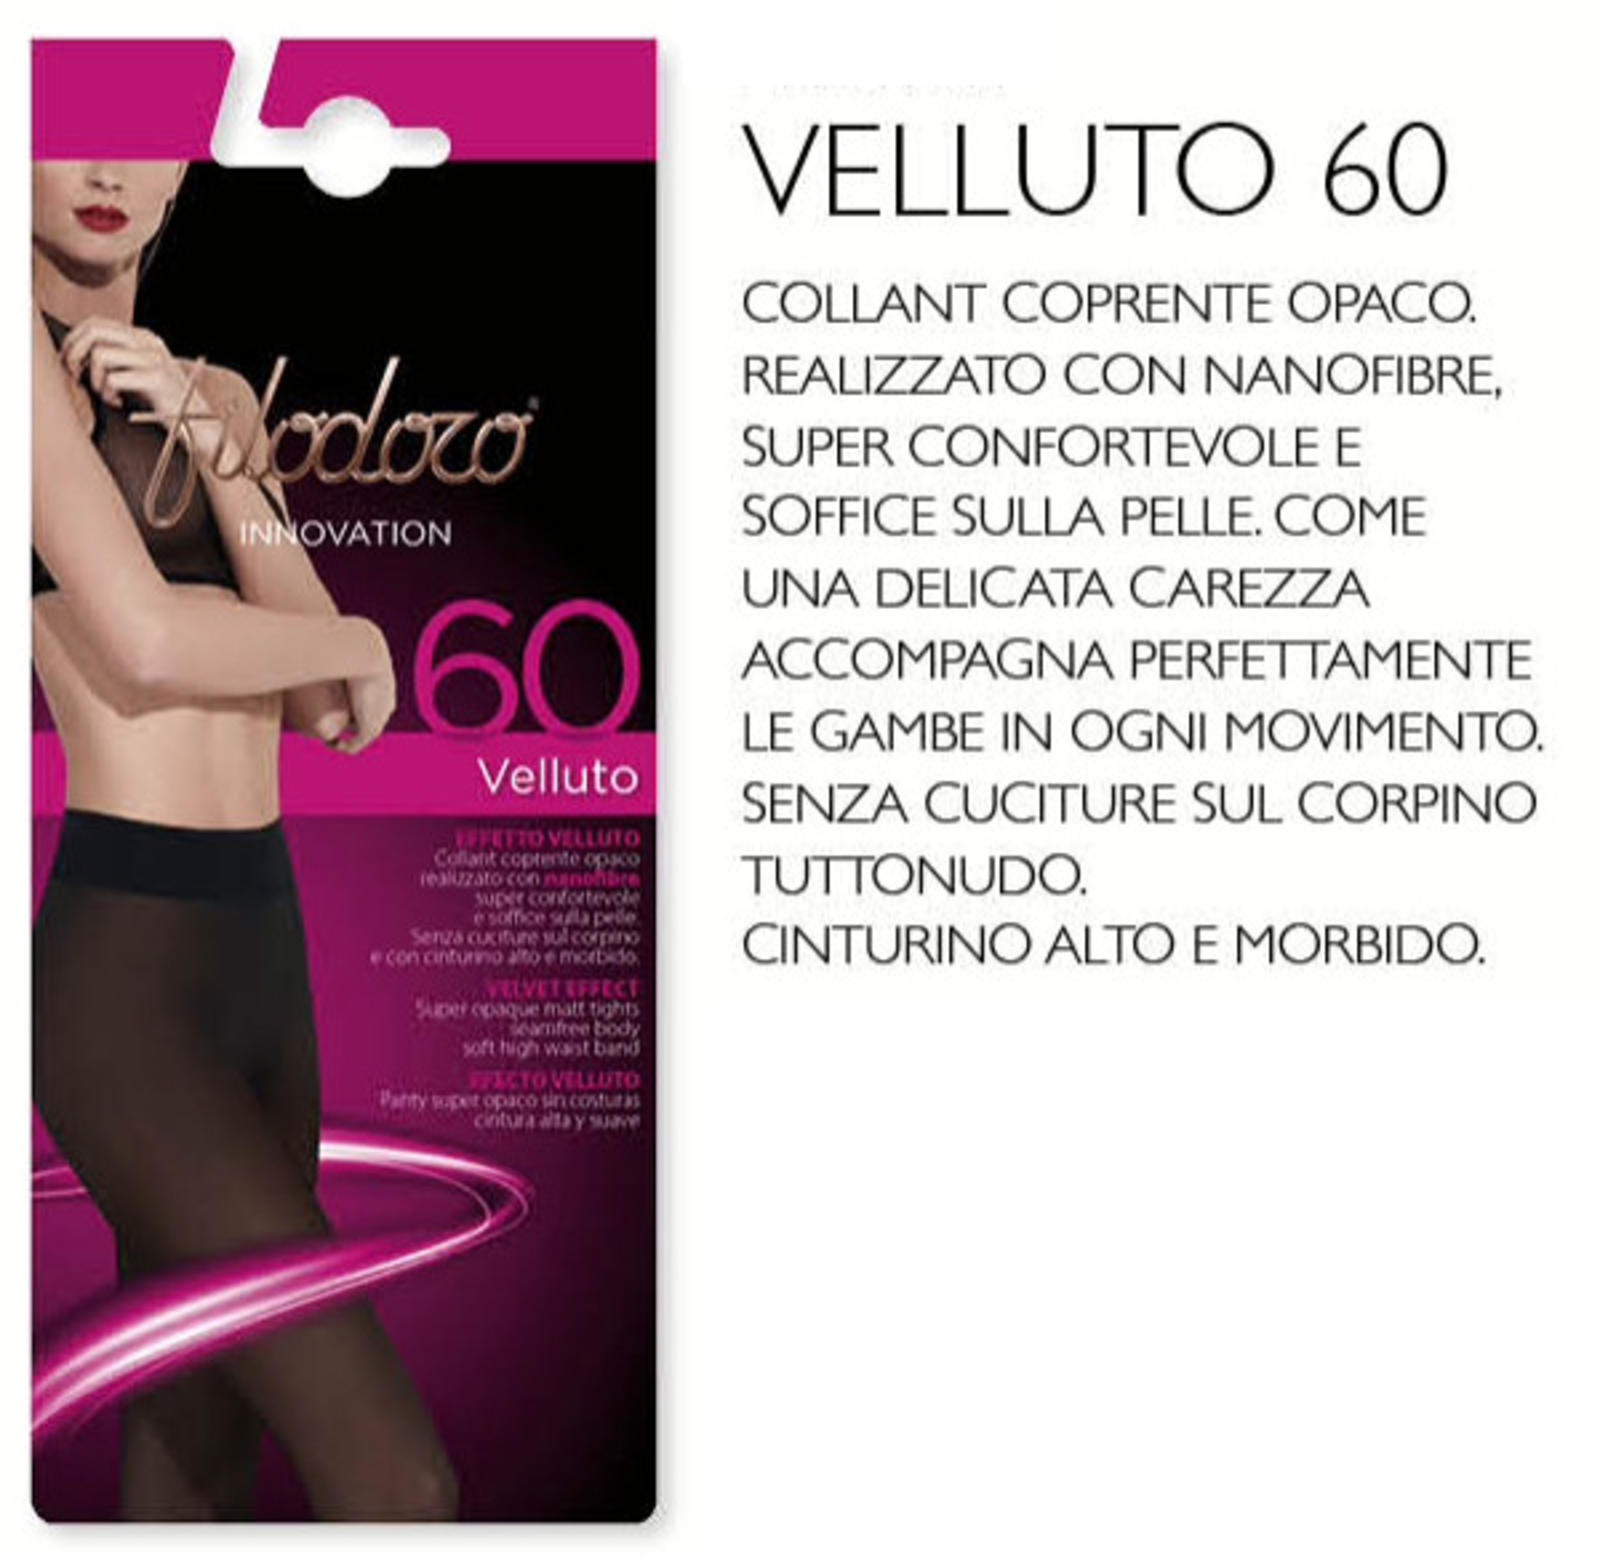 AntiCell Seamless 100 Tights